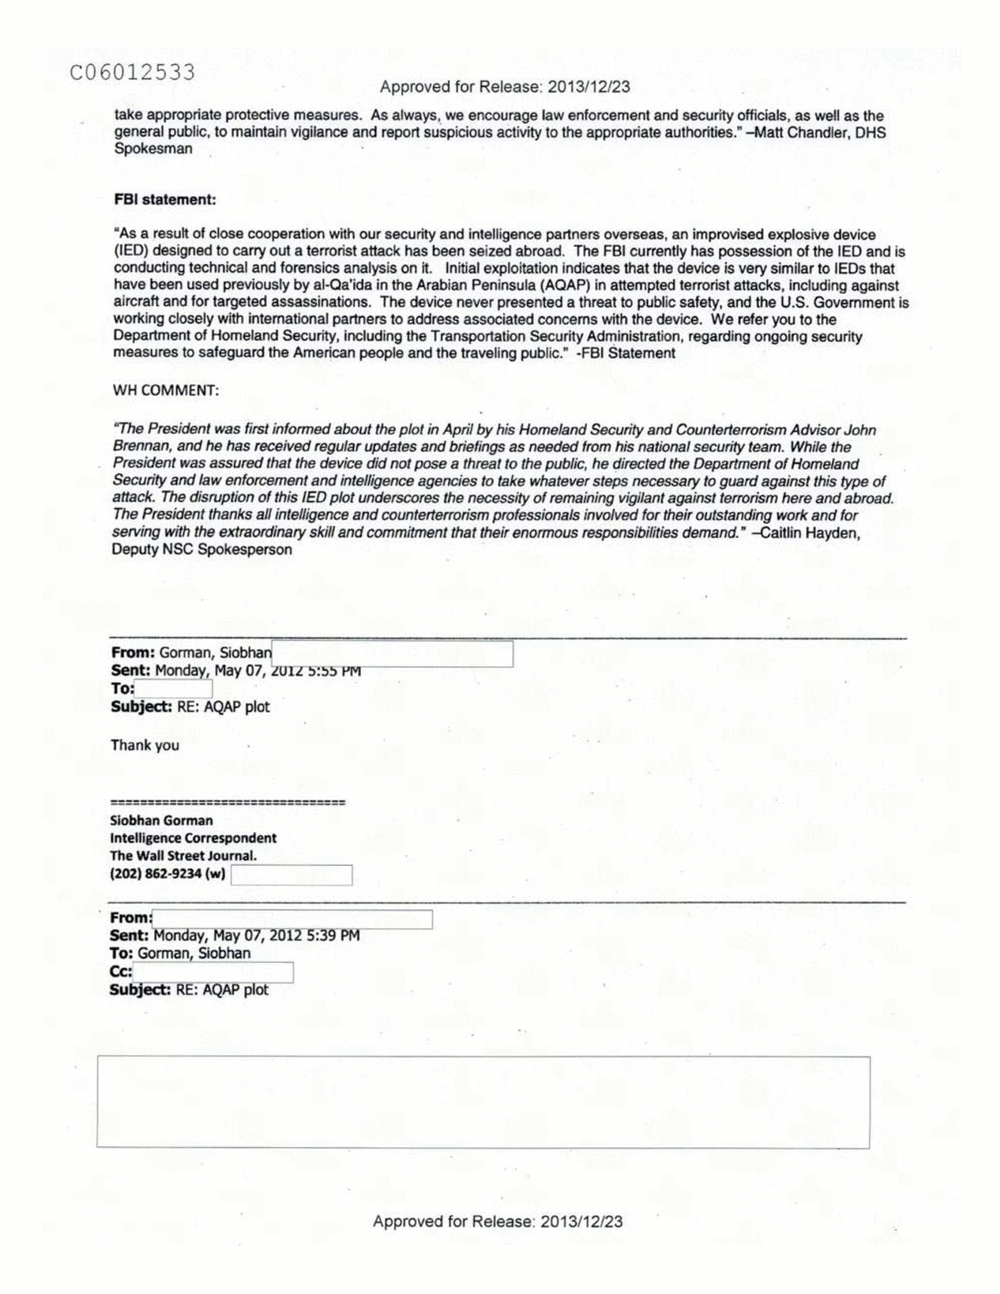 Page 64 from Email Correspondence Between Reporters and CIA Flacks